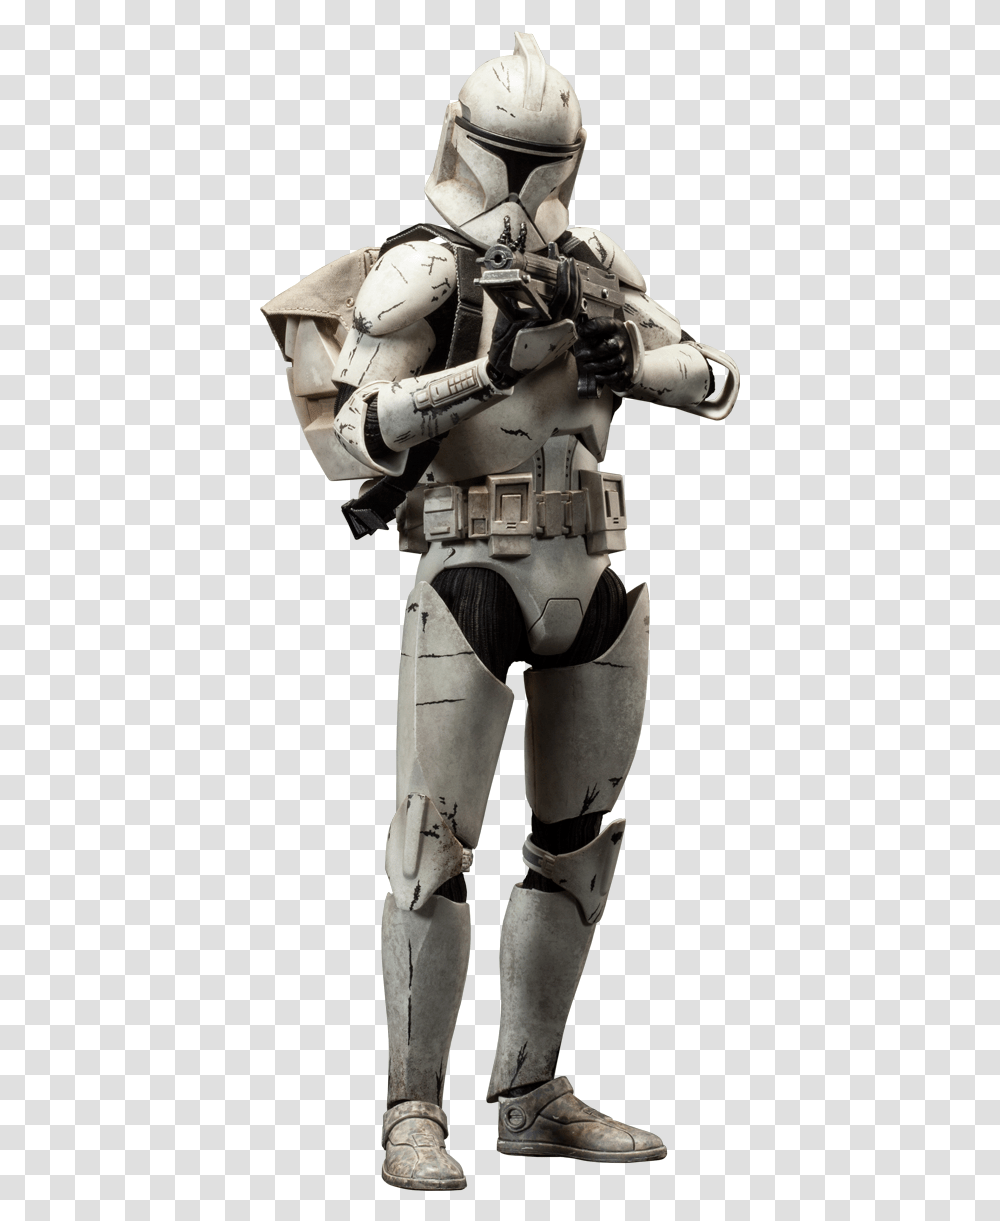 Stormtrooper Icon Clipart Web Icons Star Wars Clonetrooper Design, Armor, Helmet, Clothing, Apparel Transparent Png